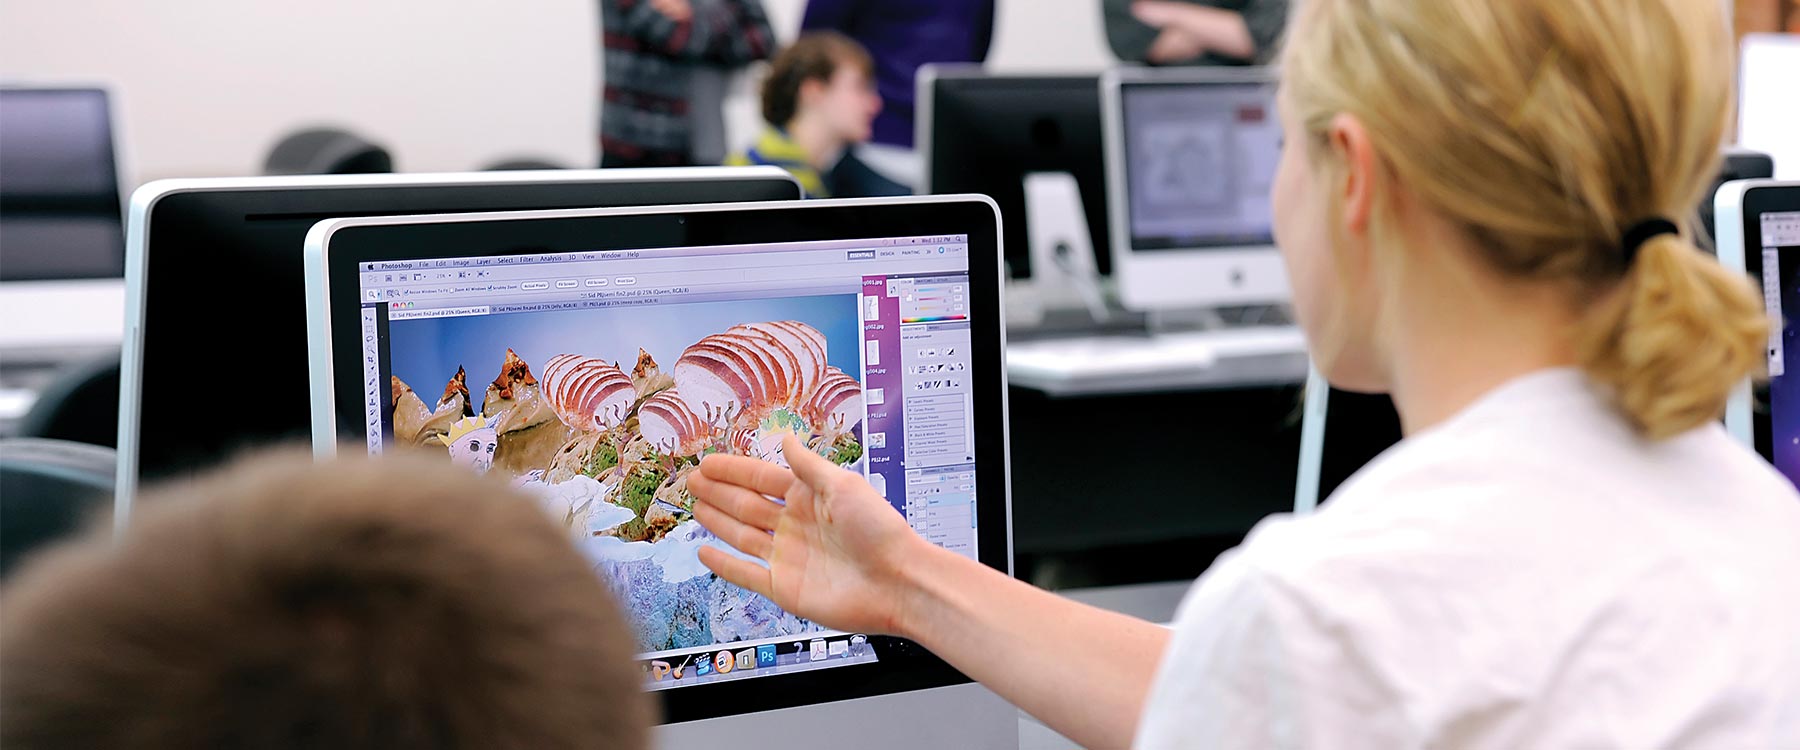 A student points to an iMac screen. On the screen is an eclectic and colorful design. 